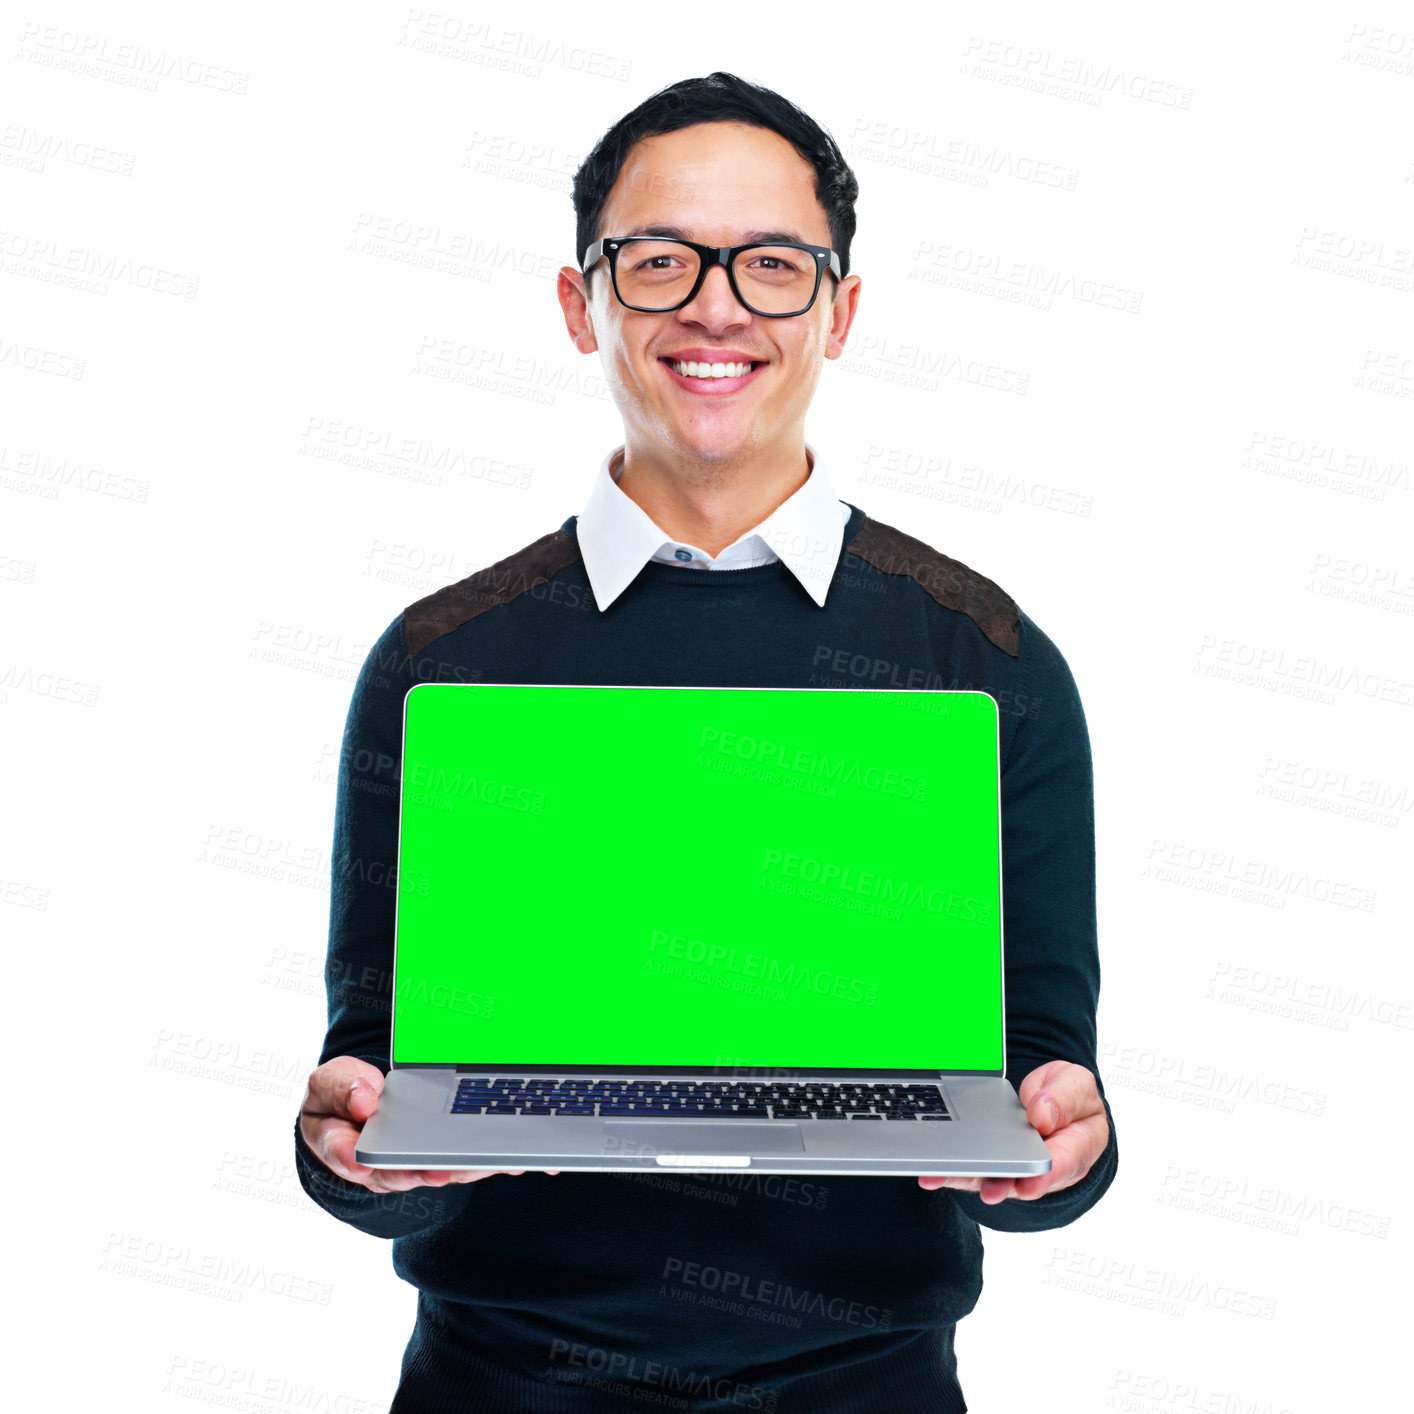 Buy stock photo Portrait of a young businessman holding a laptop on a white background